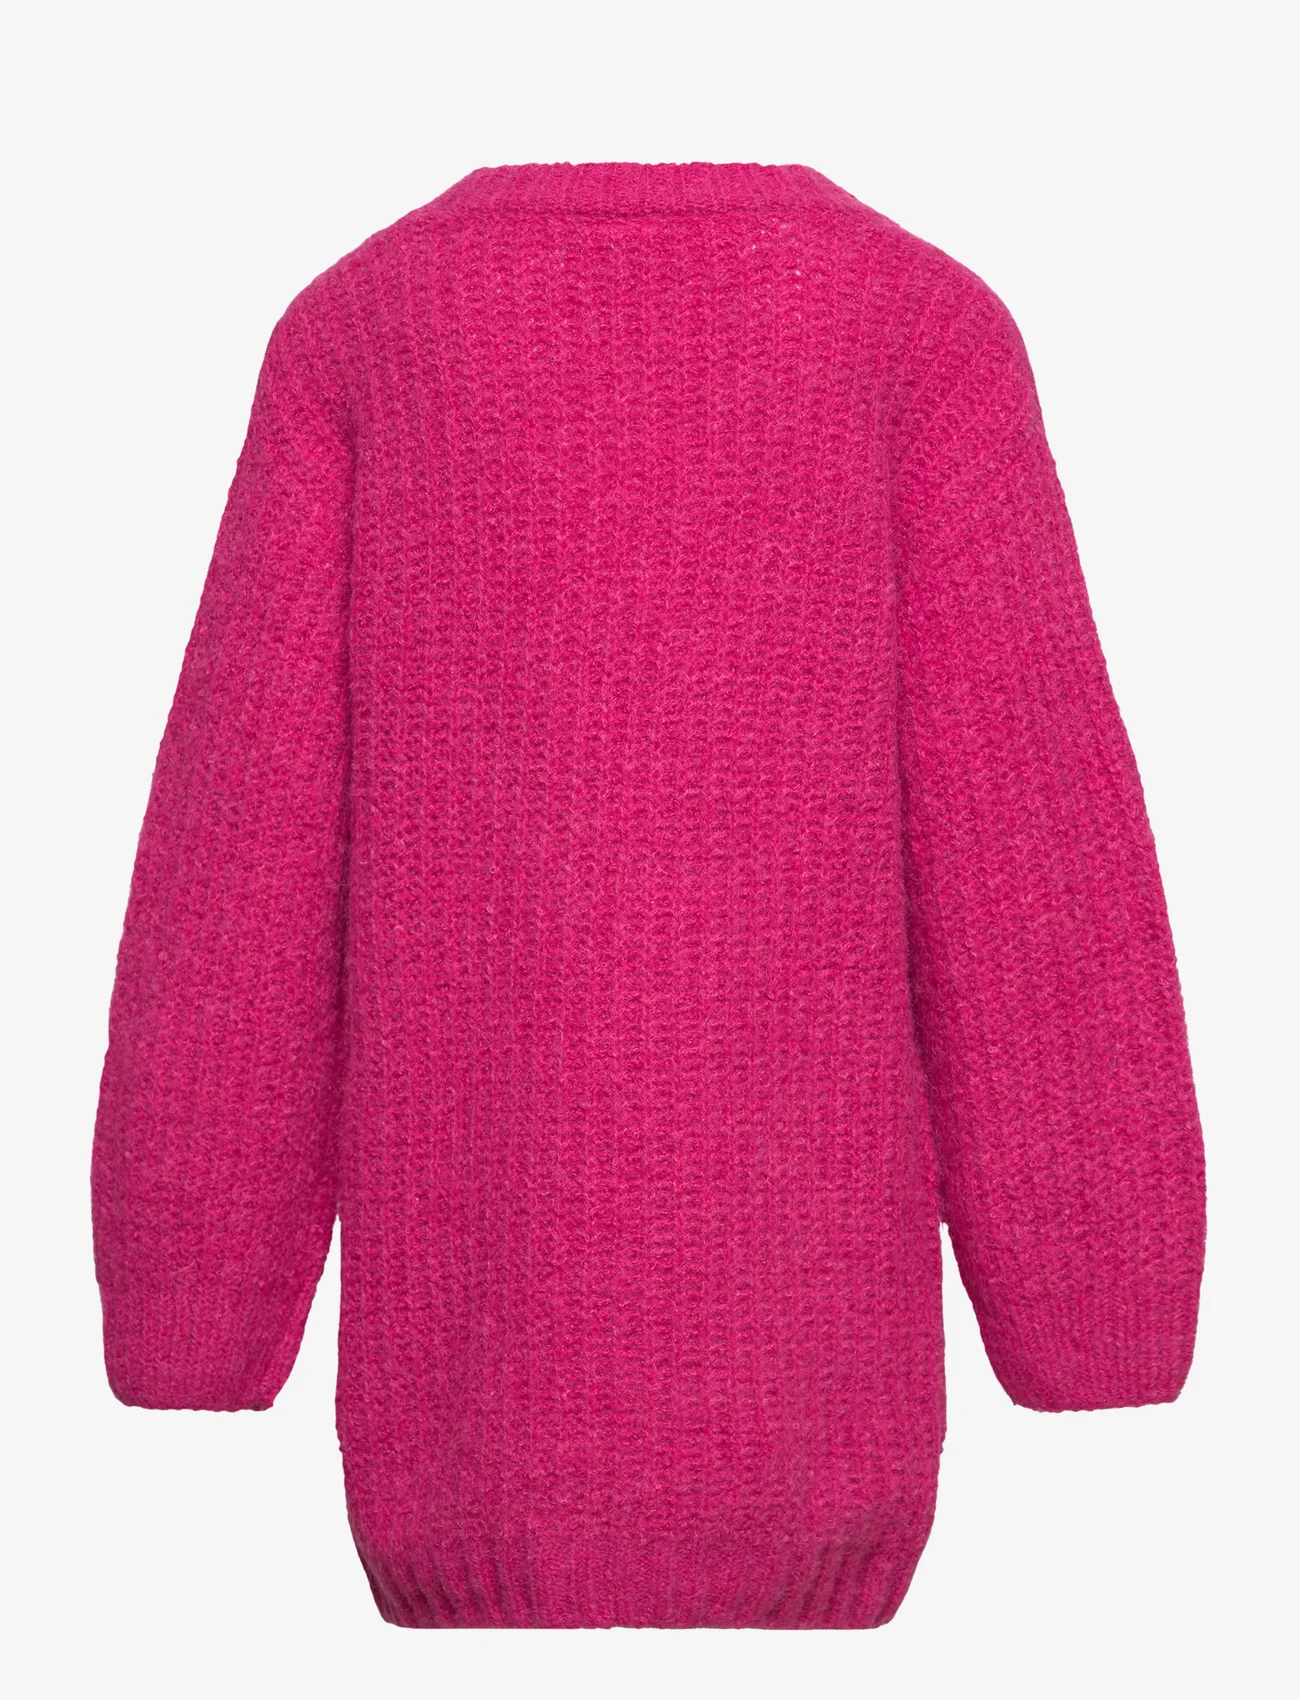 name it - NKFOMINKE LS LONG KNIT CARD - cardigans - pink cosmos - 1